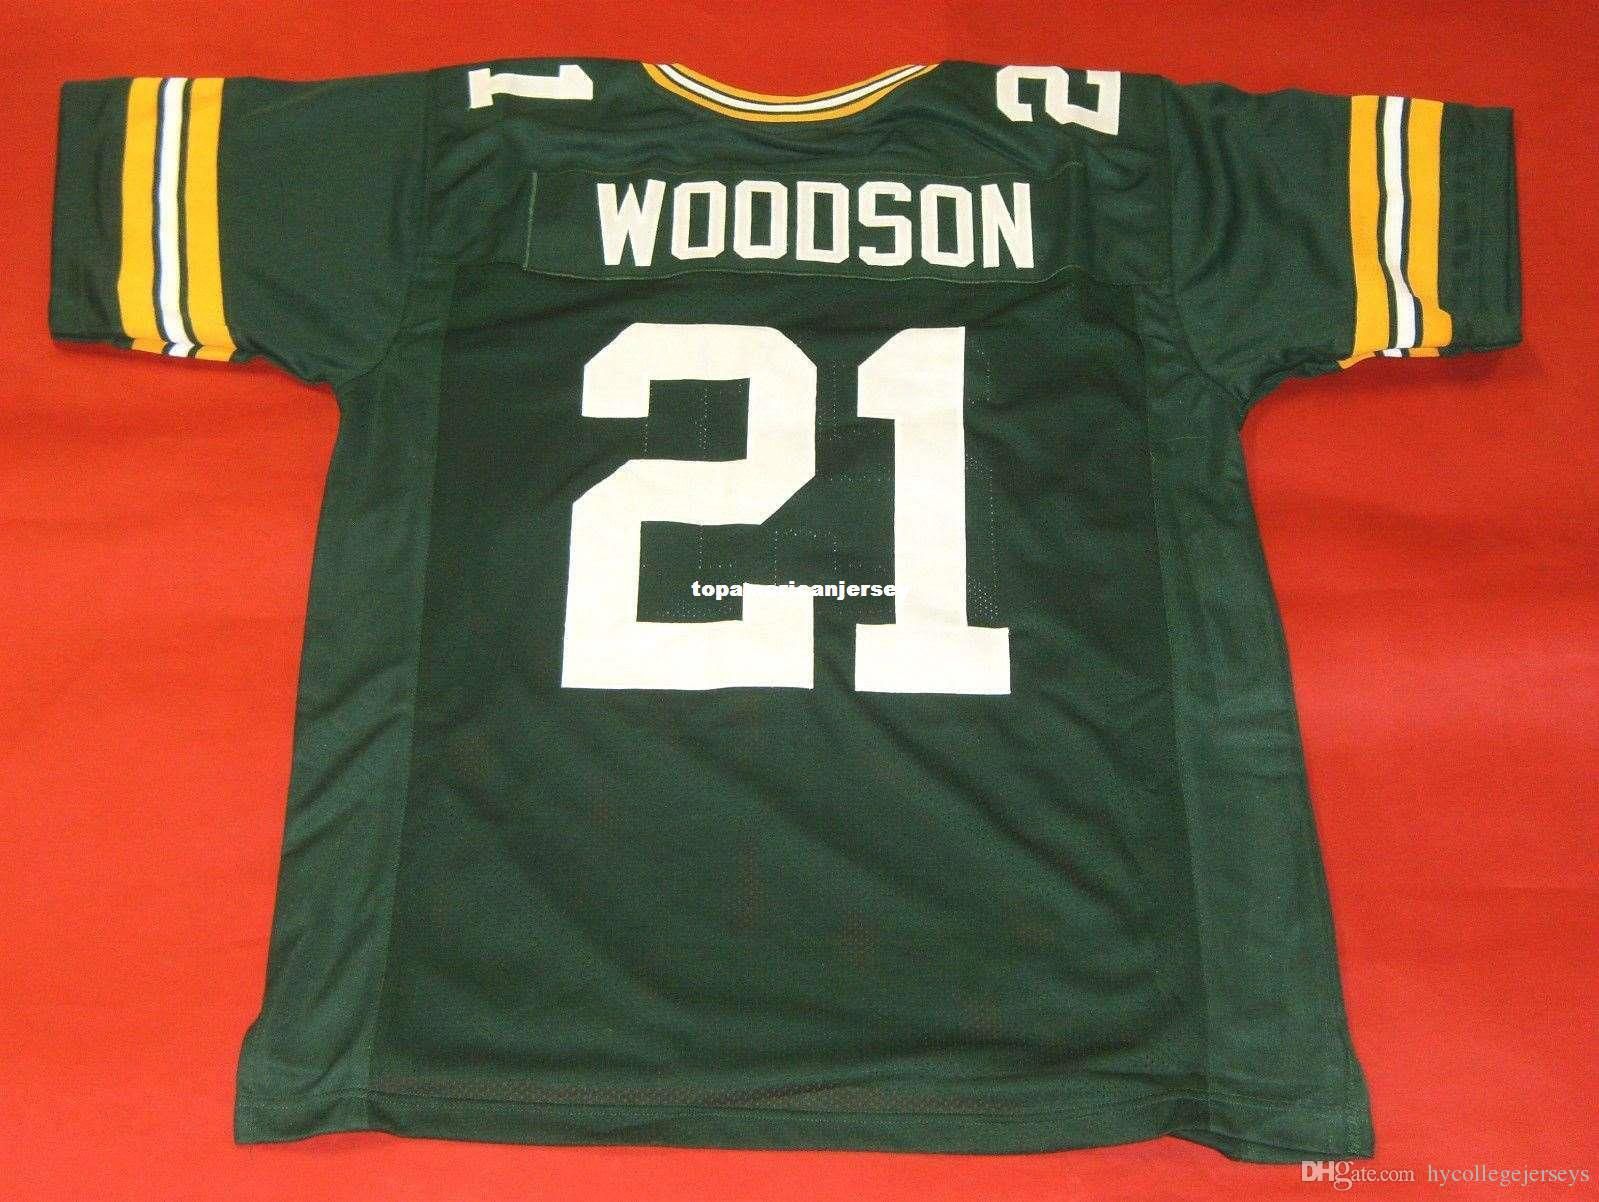 mitchell and ness charles woodson jersey